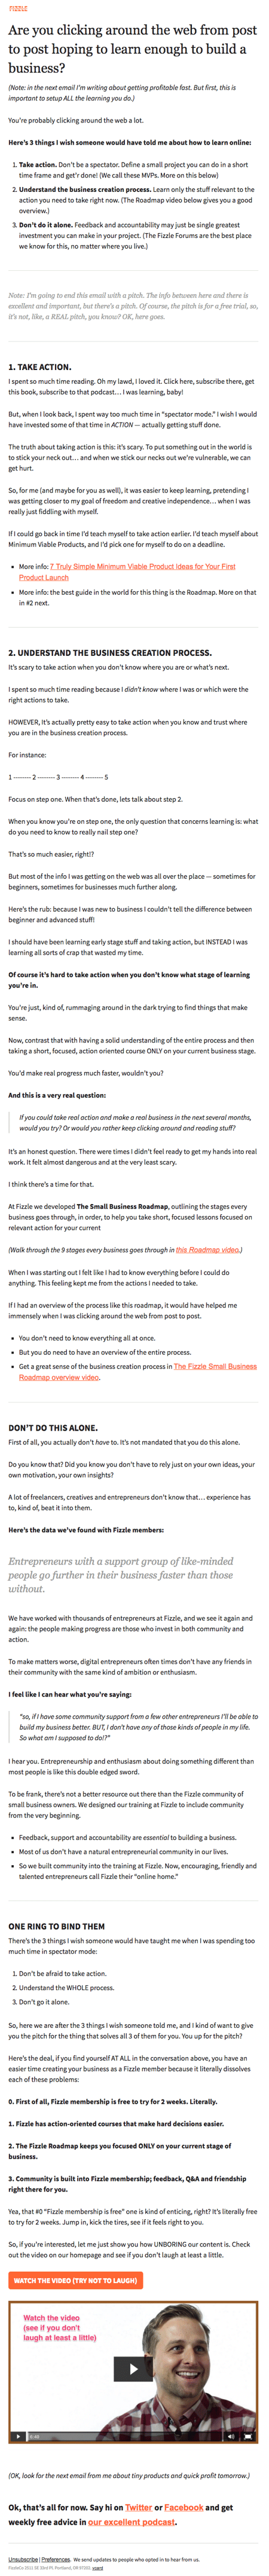 Email Newsletter Example: Fizzle